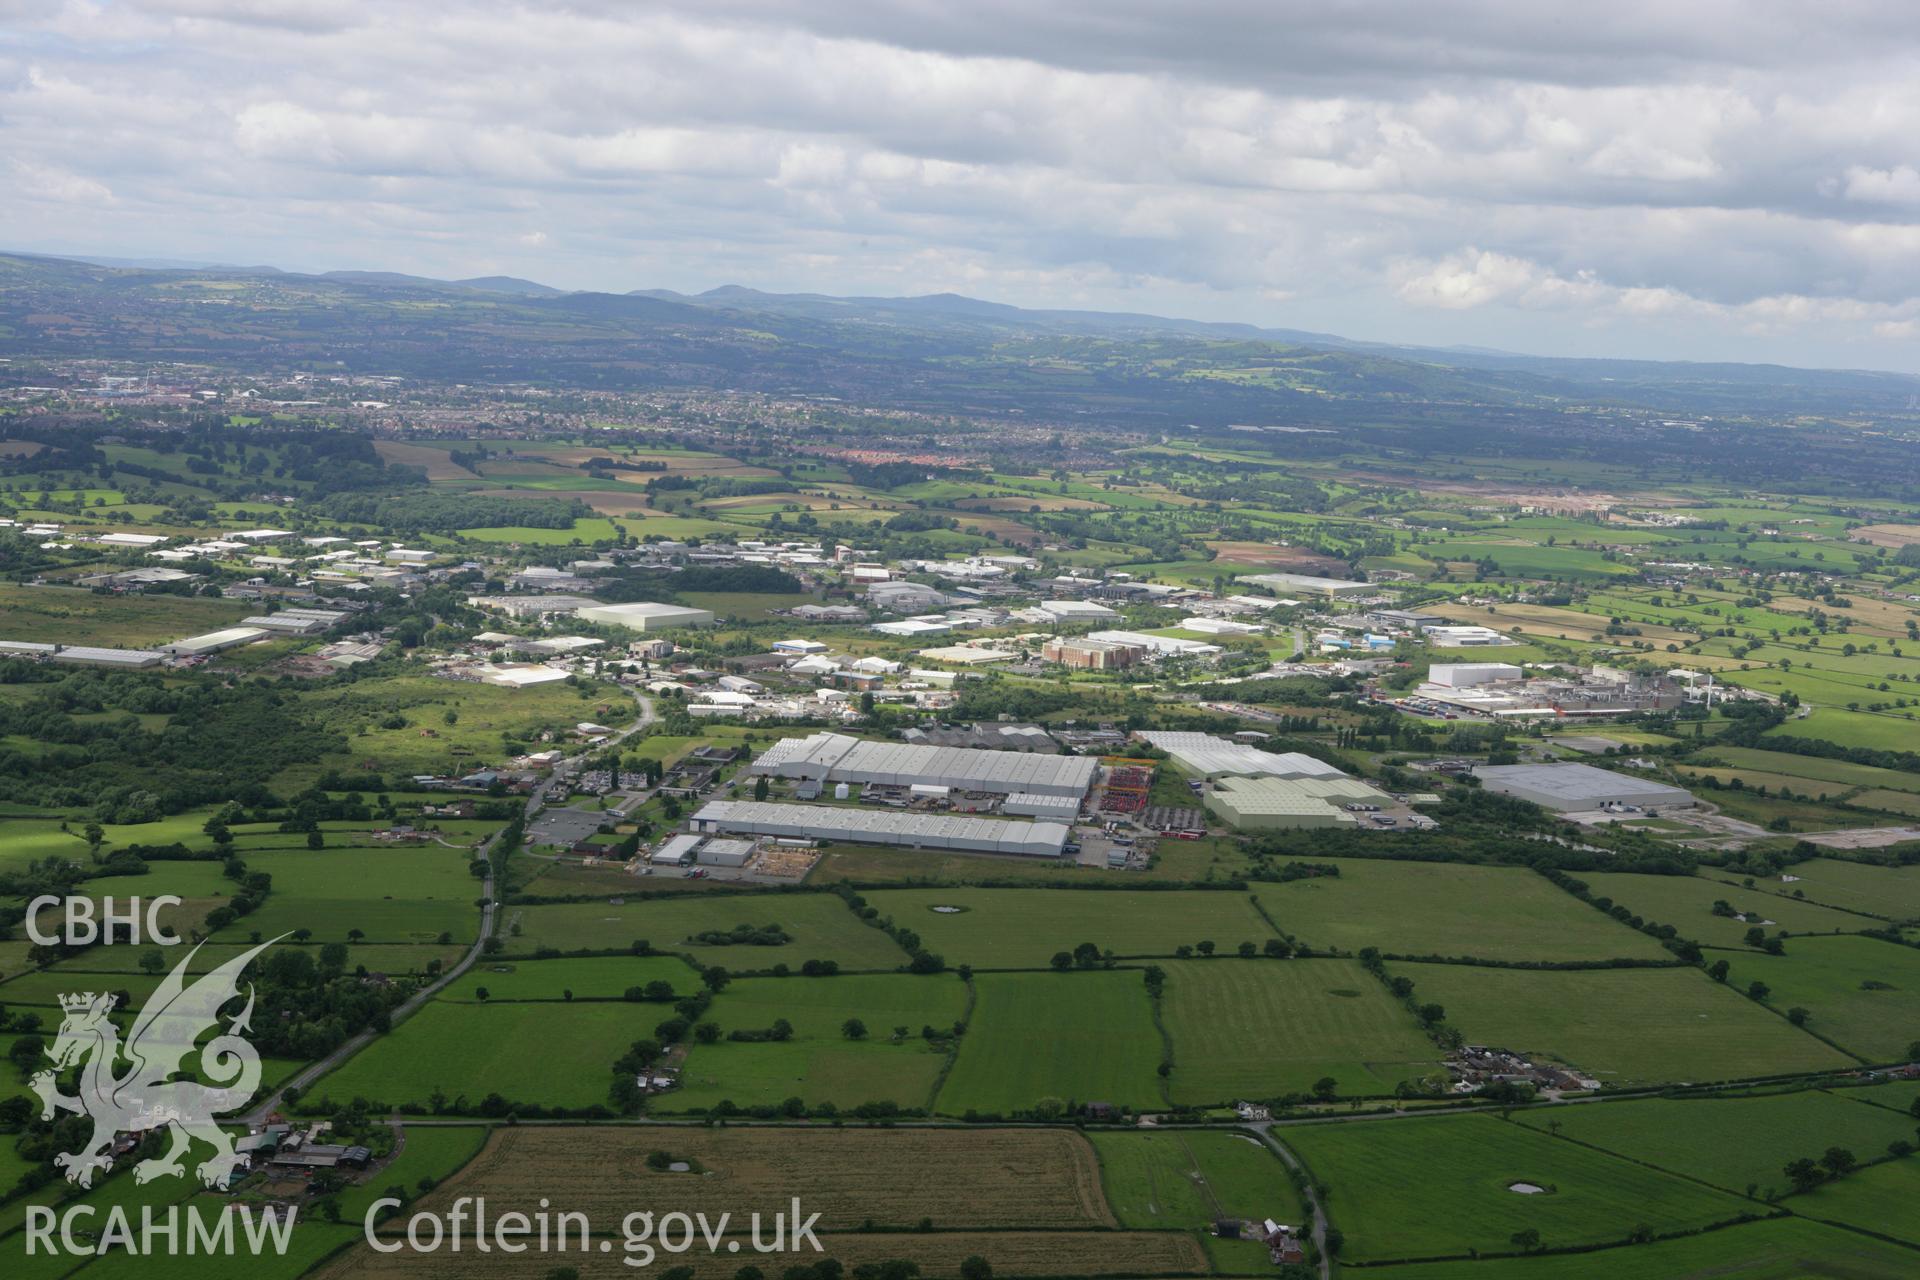 RCAHMW colour oblique aerial photograph of Wrexham. Taken on 24 July 2007 by Toby Driver